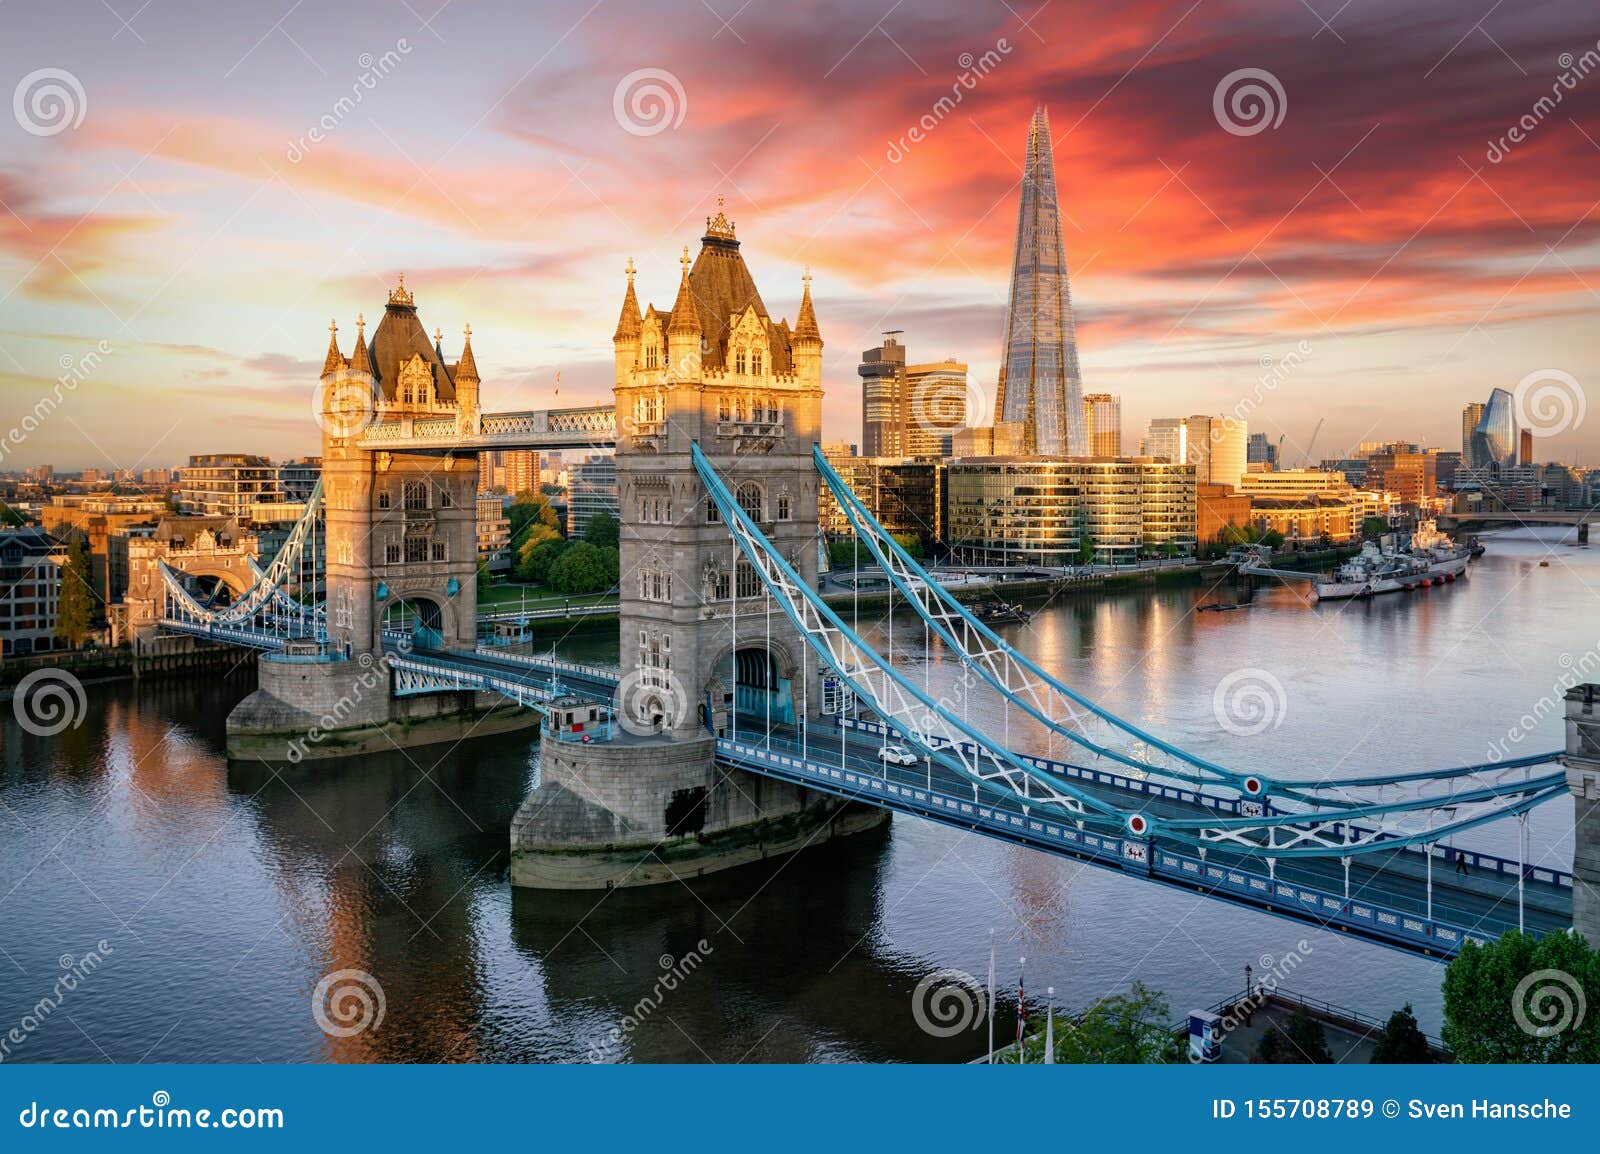 the tower bridge of london and the skyline along the thames river, united kingdom